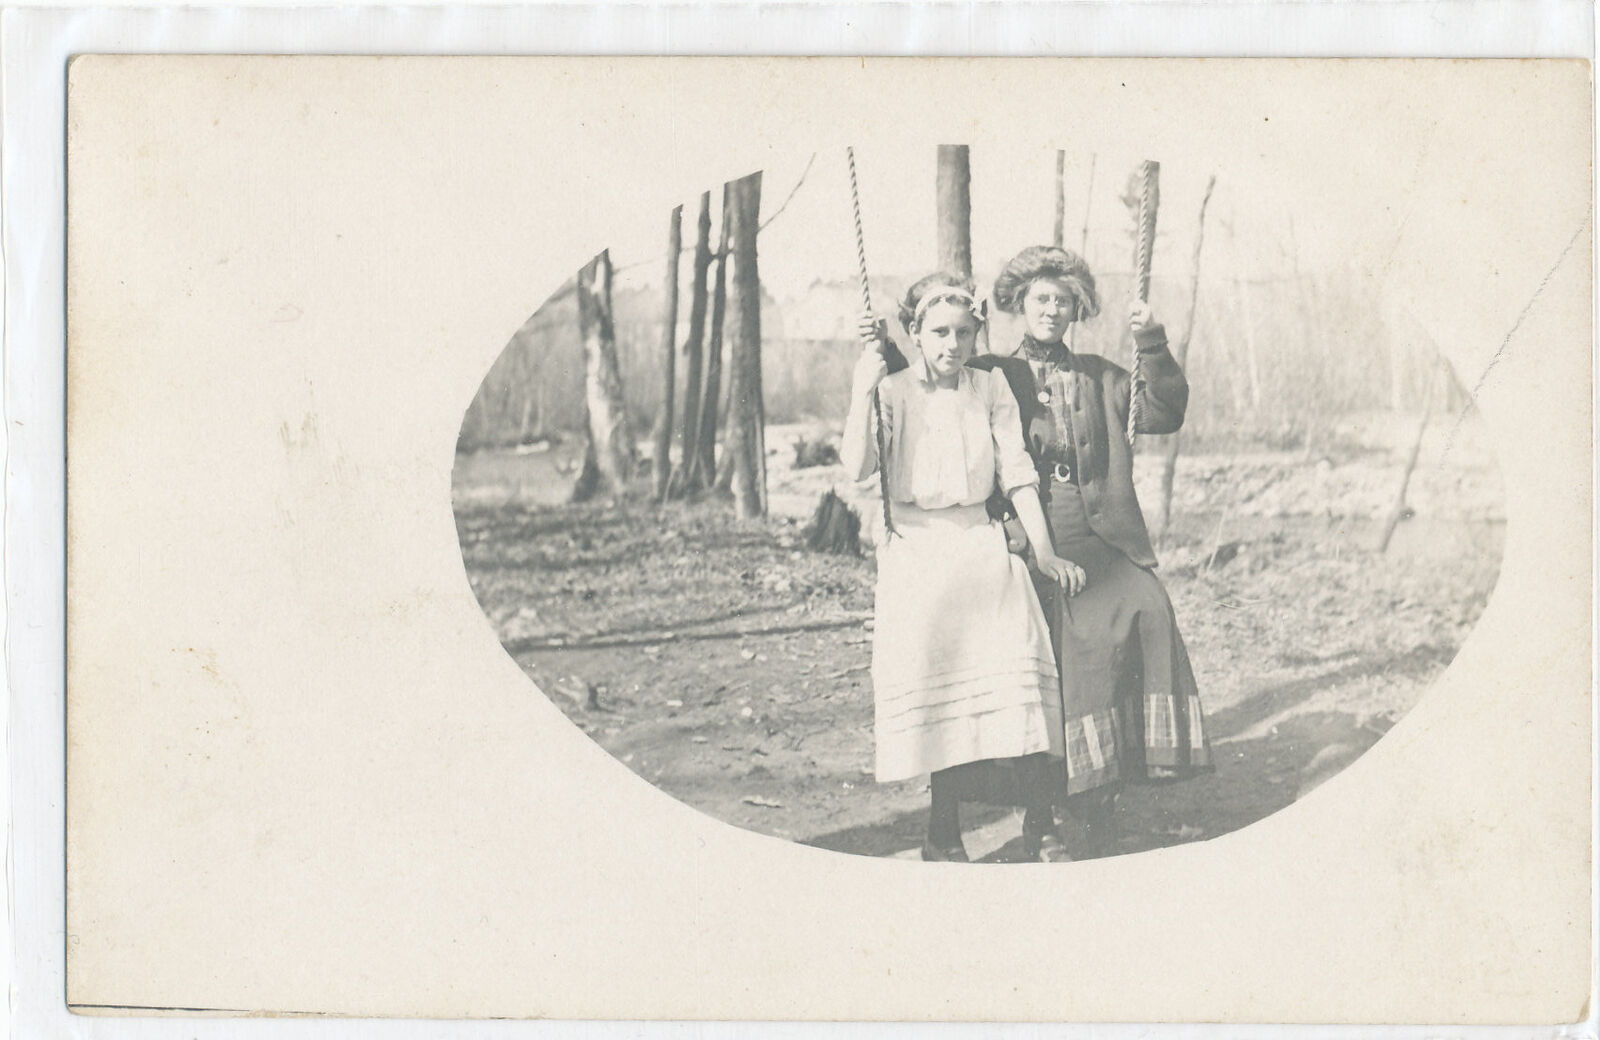 RPPC Two Women on a Swing -wooded area trees - B&W PHOTO postcard No